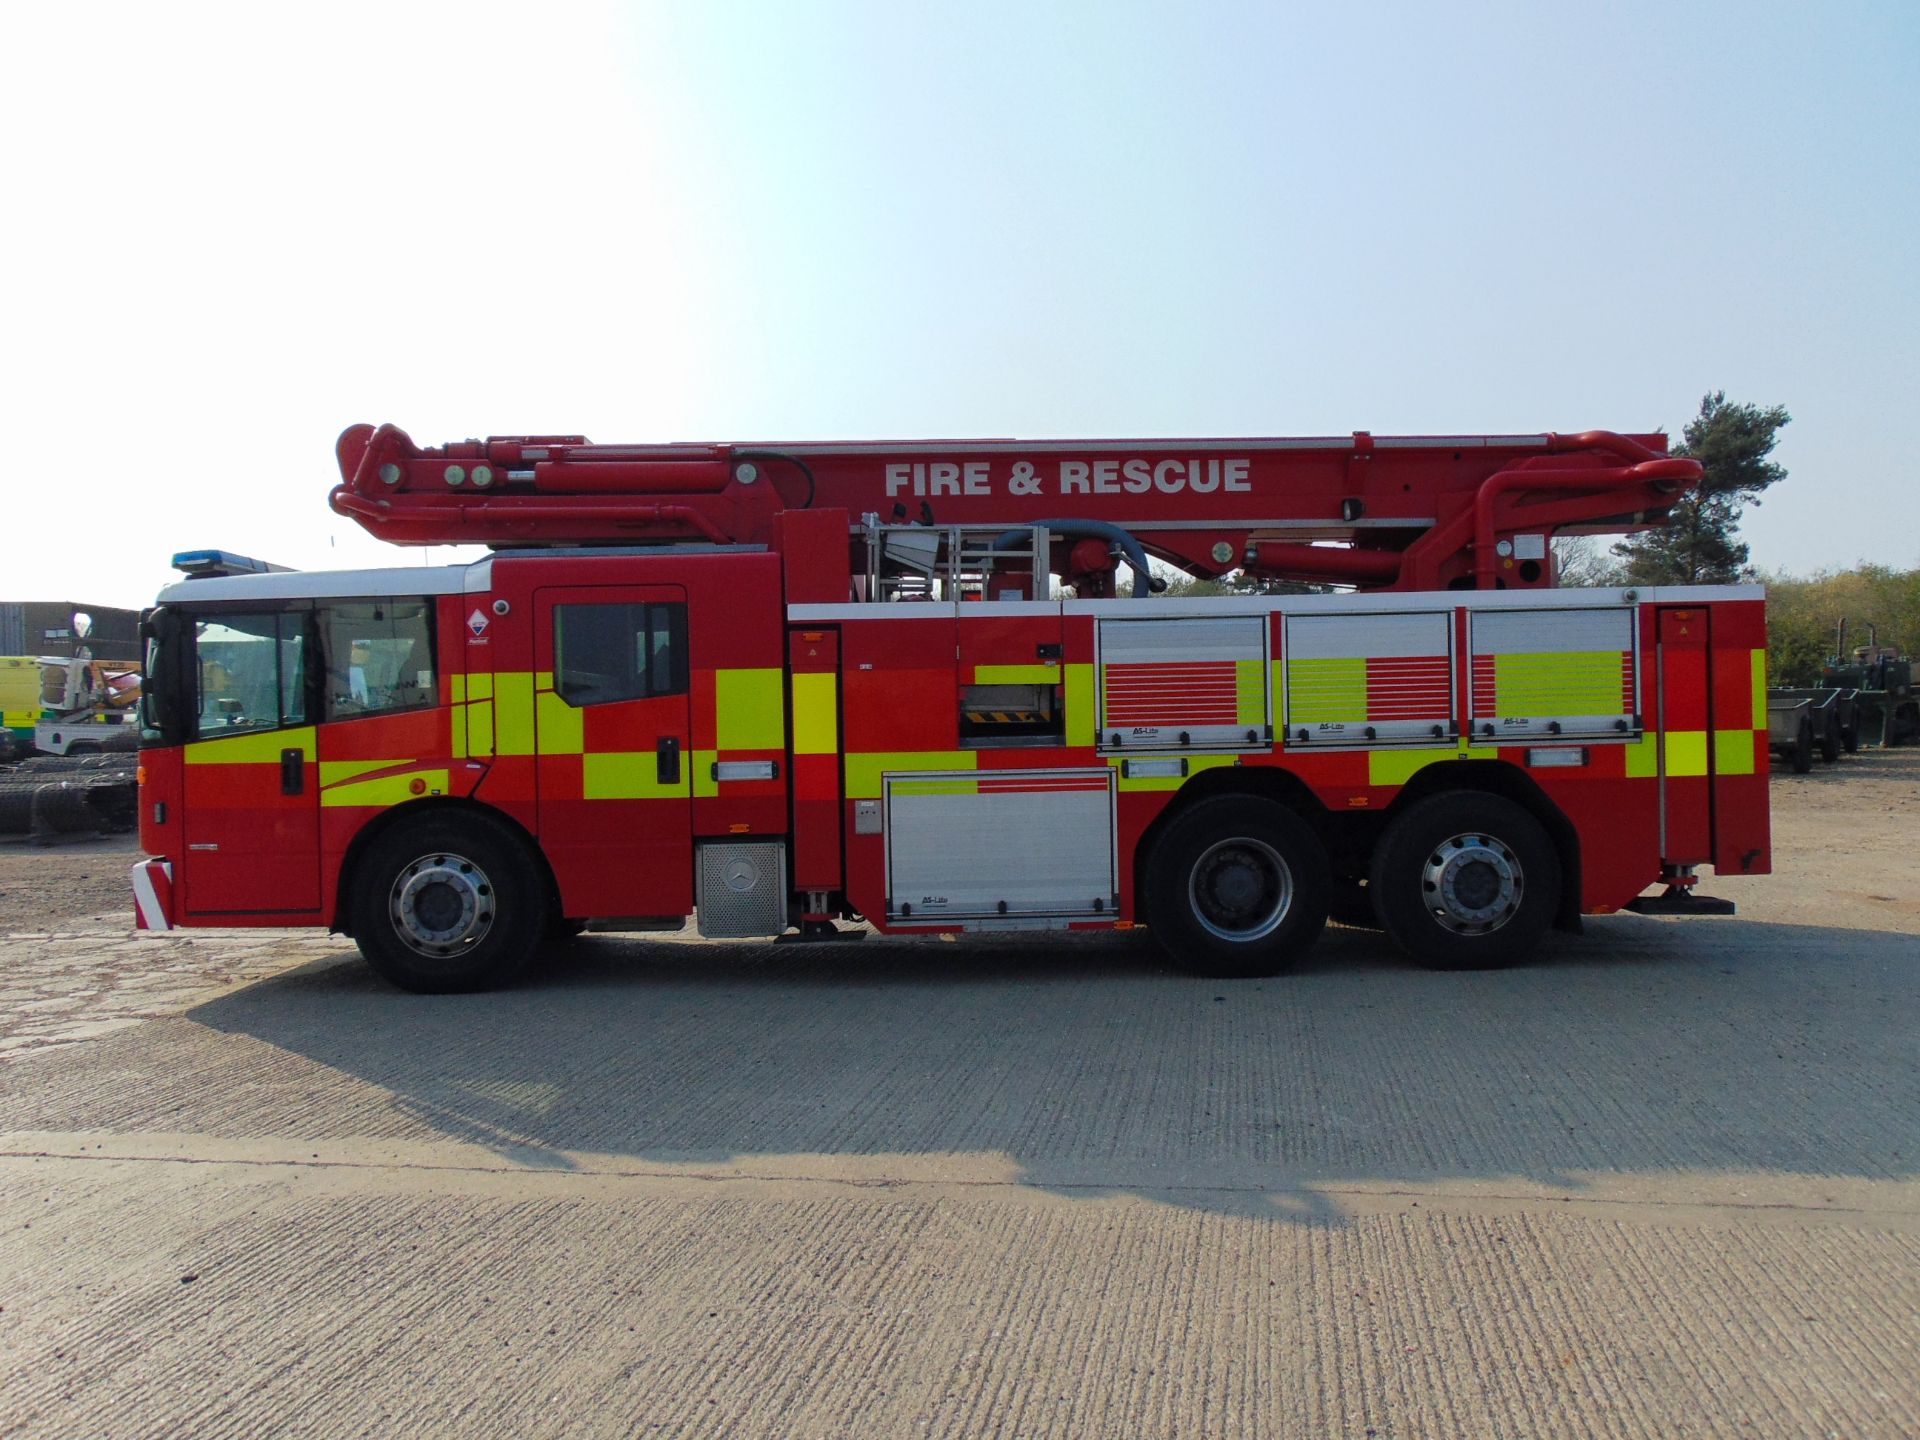 2008 Mercedes Econic CARP (Combined Aerial Rescue Pump) 6x2 Aerial Work Platform / Fire Appliance - Image 24 of 49